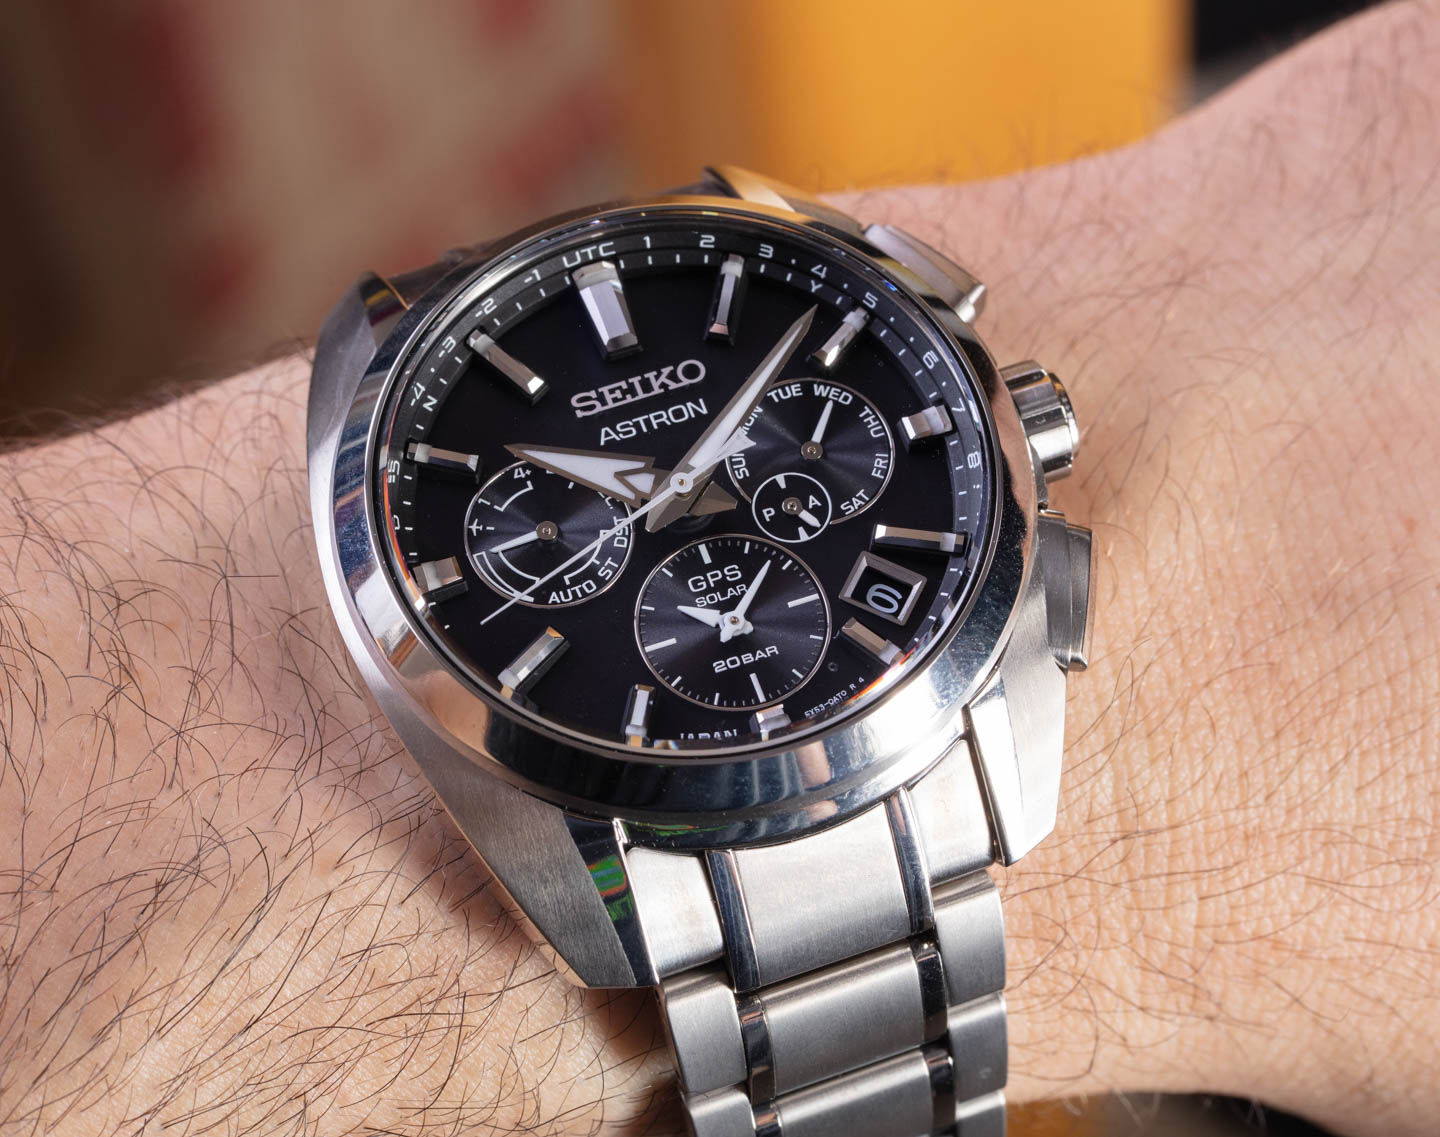 Hands-On: Seiko GPS Solar & Hattori 160th Anniversary Limited-Edition Watches |